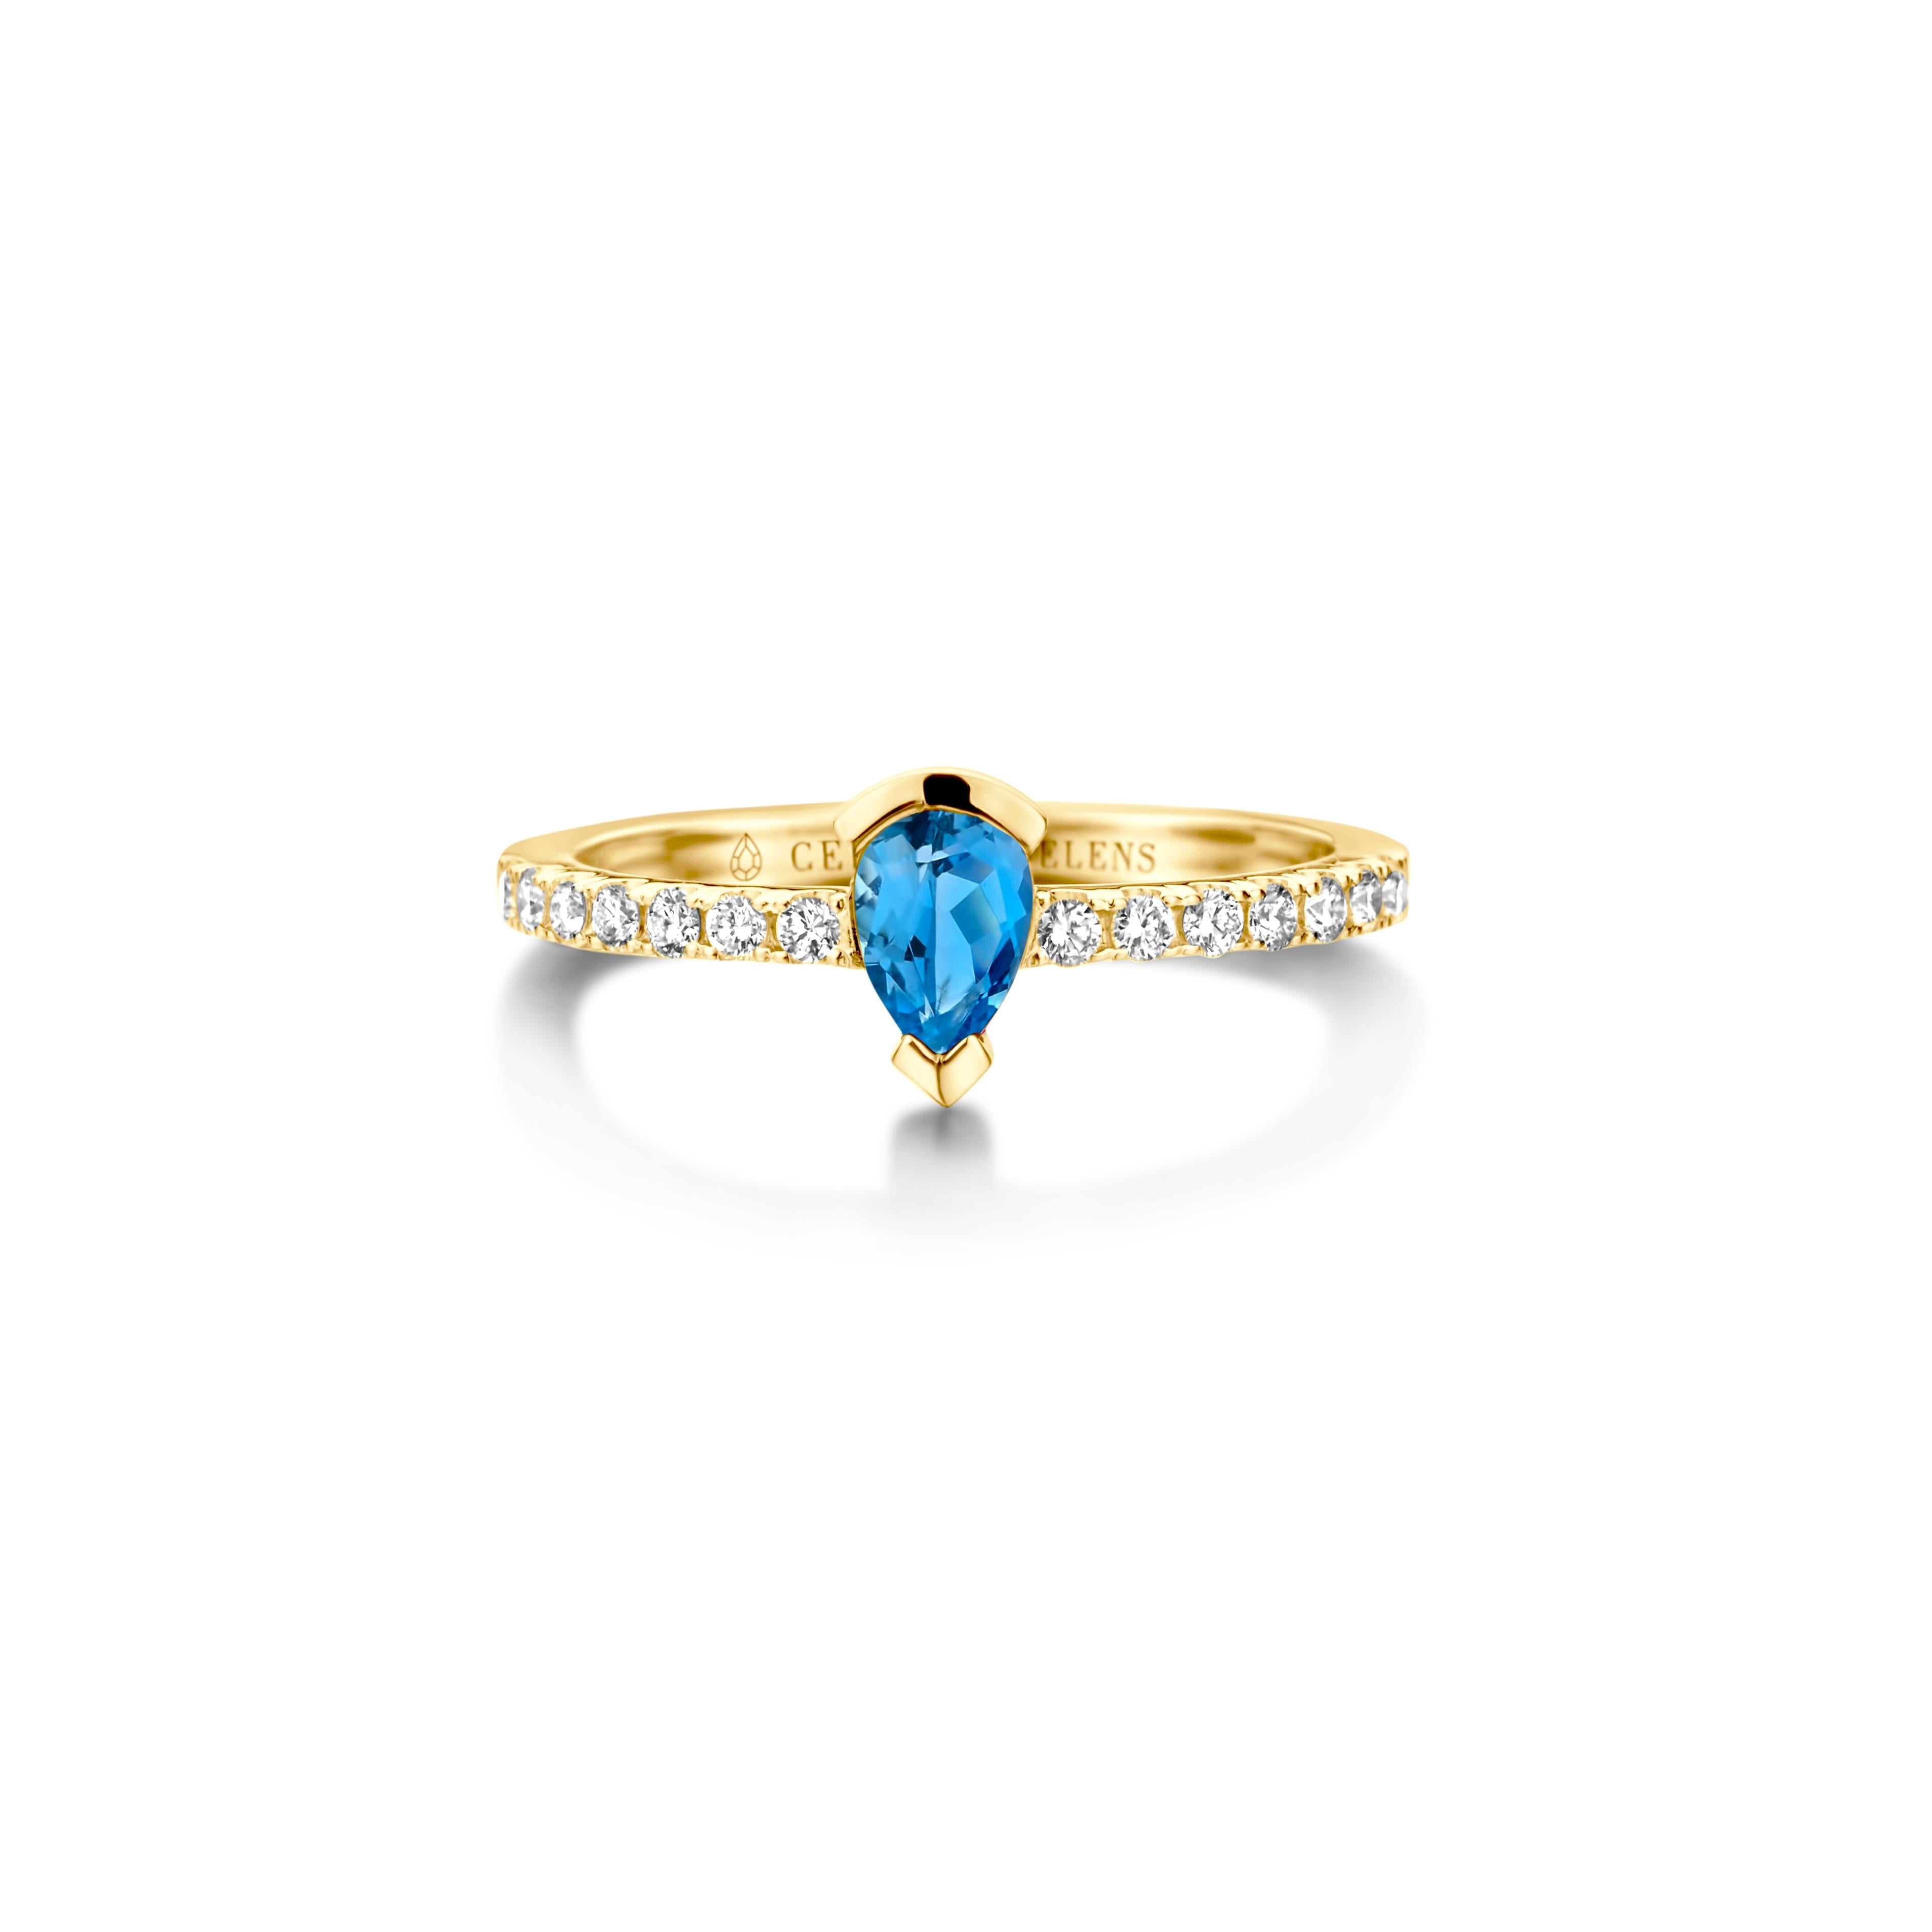 Adeline Straight ring in 18Kt rose gold set with a pear-shaped Santa Maria aquamarine and 0,24 Ct of white brilliant cut diamonds - VS F quality. Also, available in yellow gold and white gold. Celine Roelens, a goldsmith and gemologist, is